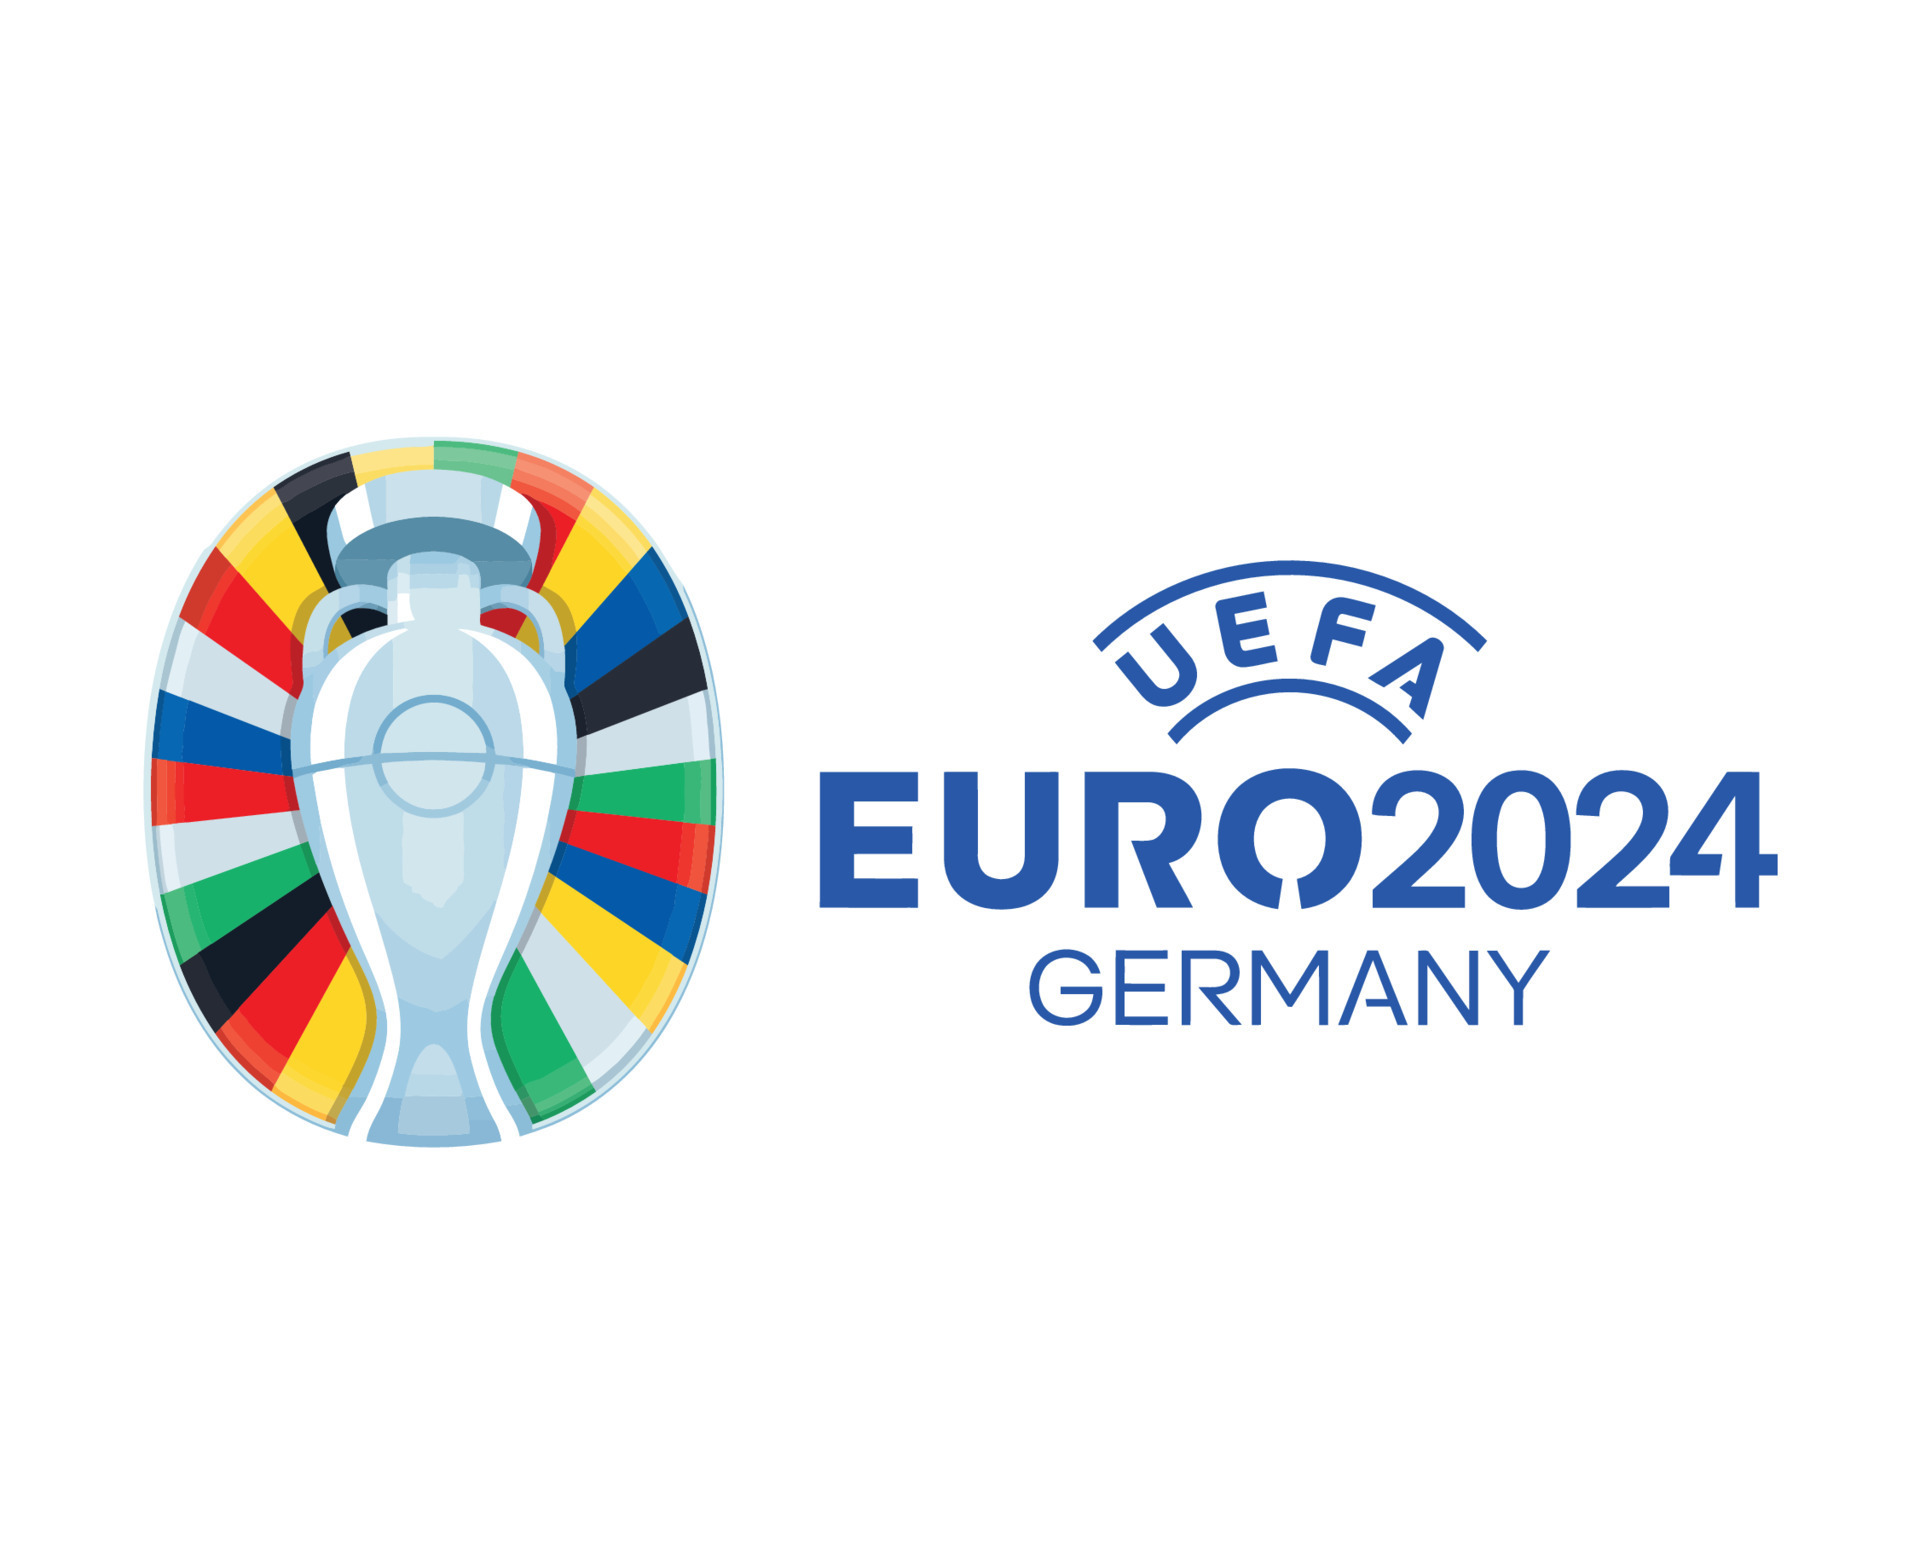 euro-2024-germany-official-logo-with-name-blue-symbol-european-football-final-design-illustration-free-vector.jpg